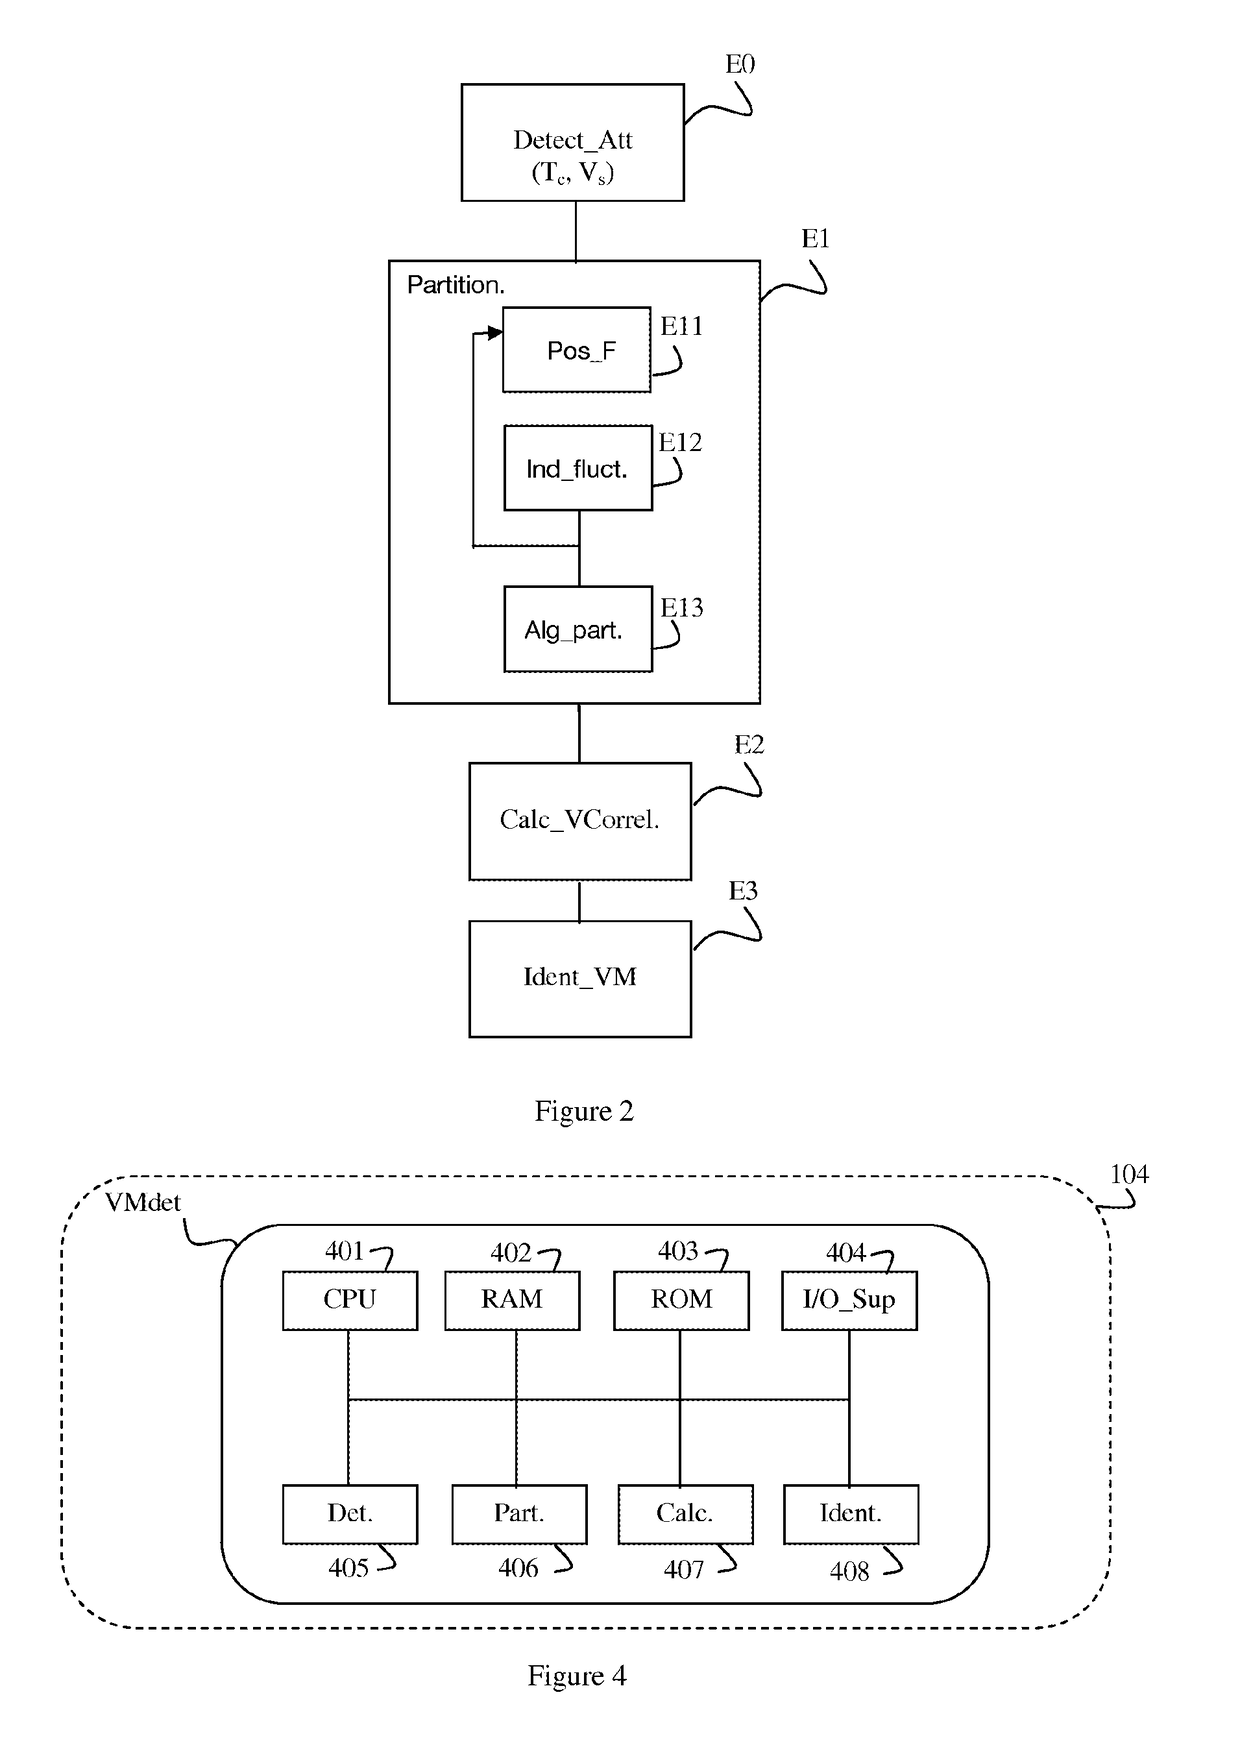 Method of detecting attacks in a cloud computing architecture